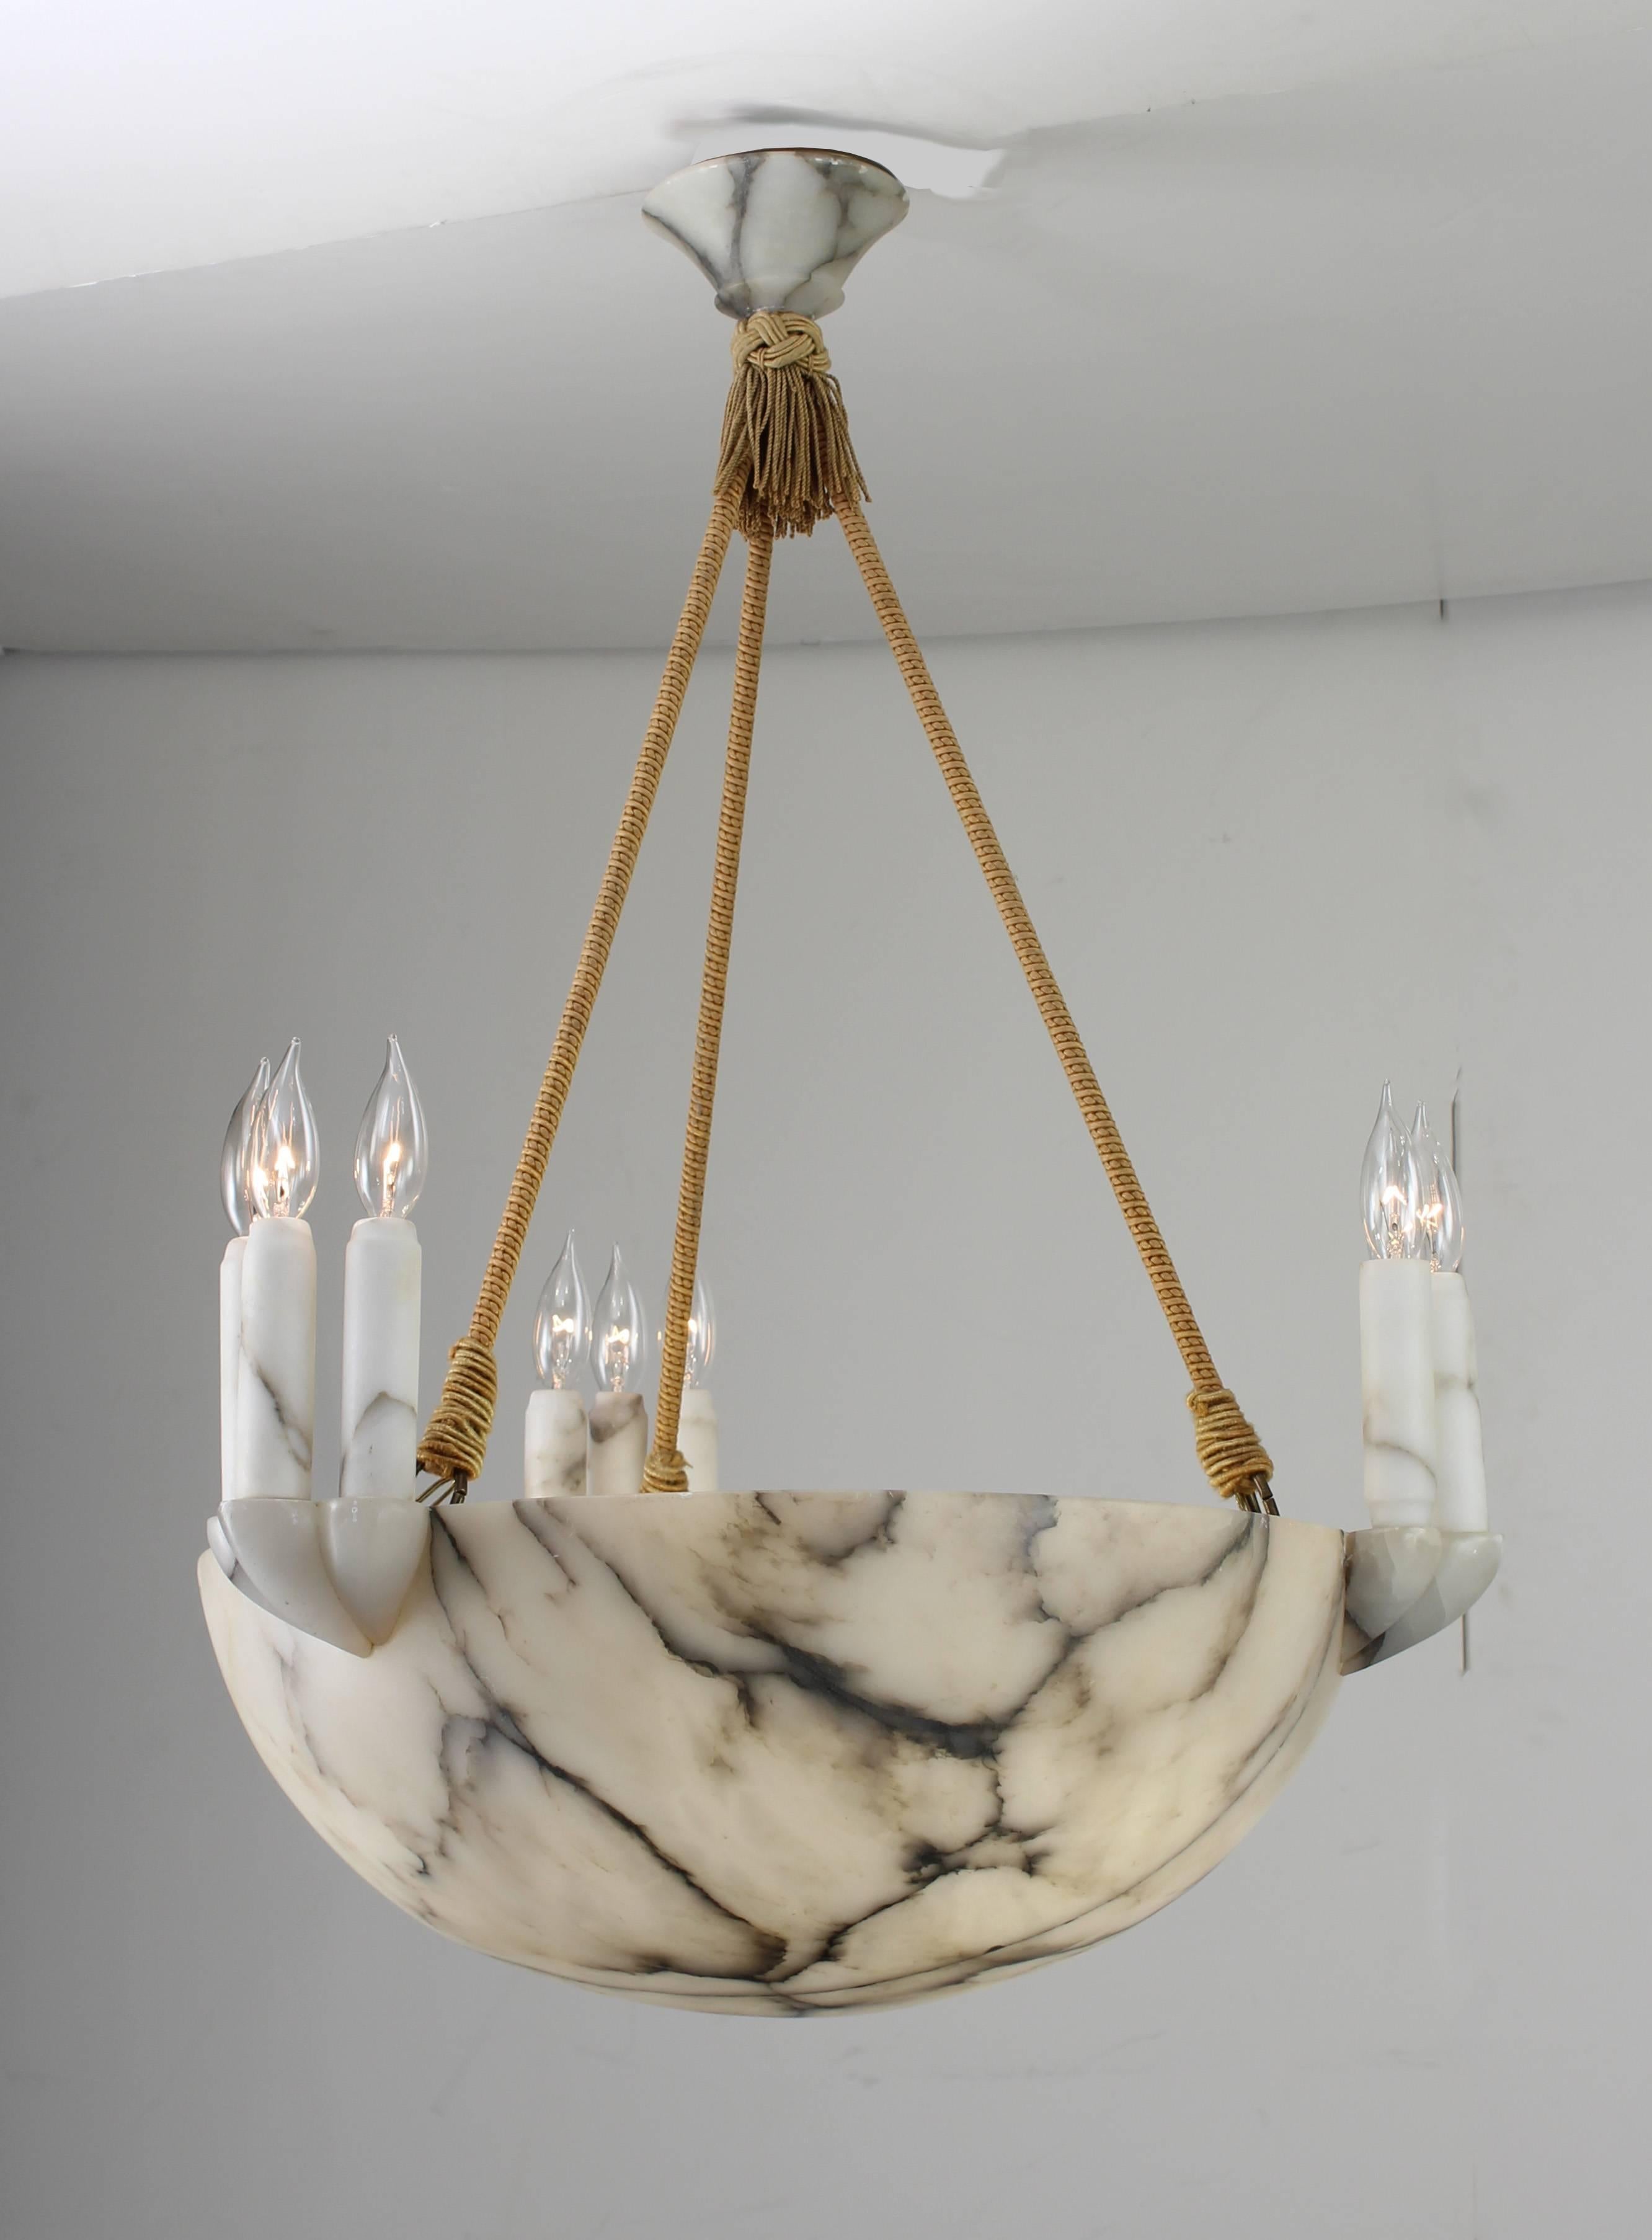 Art Deco Alabaster bowl pendant light. Outstanding variance in the veining and color of stone. Each set of three candles is supported by a carved alabaster form. Gold fabric tassel and suspension. Canopy is matching alabaster. Incandescent lamping,